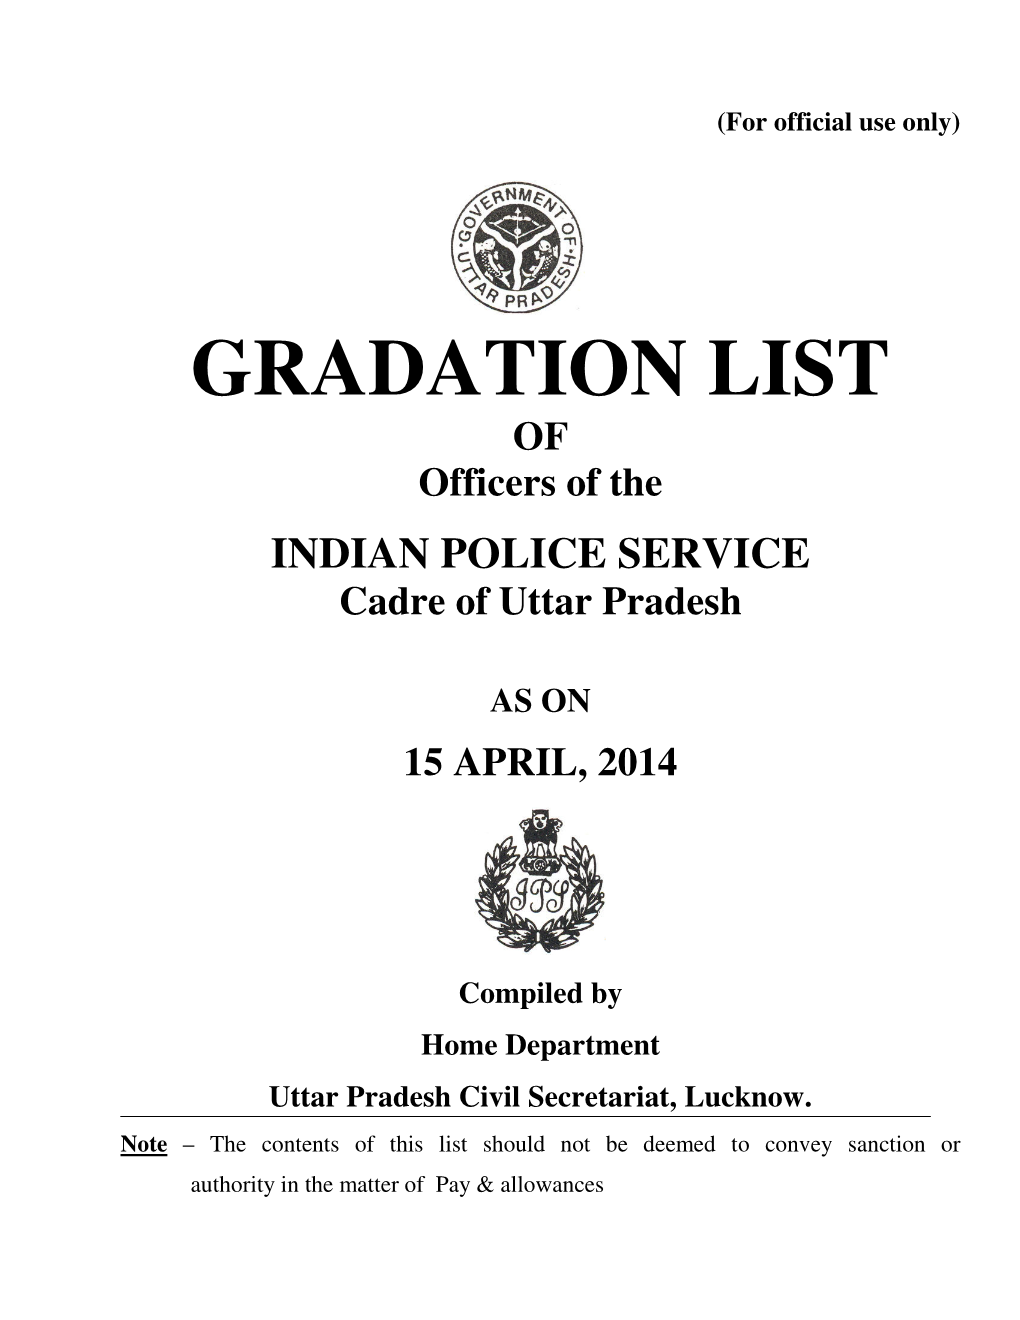 GRADATION LIST of Officers of the INDIAN POLICE SERVICE Cadre of Uttar Pradesh